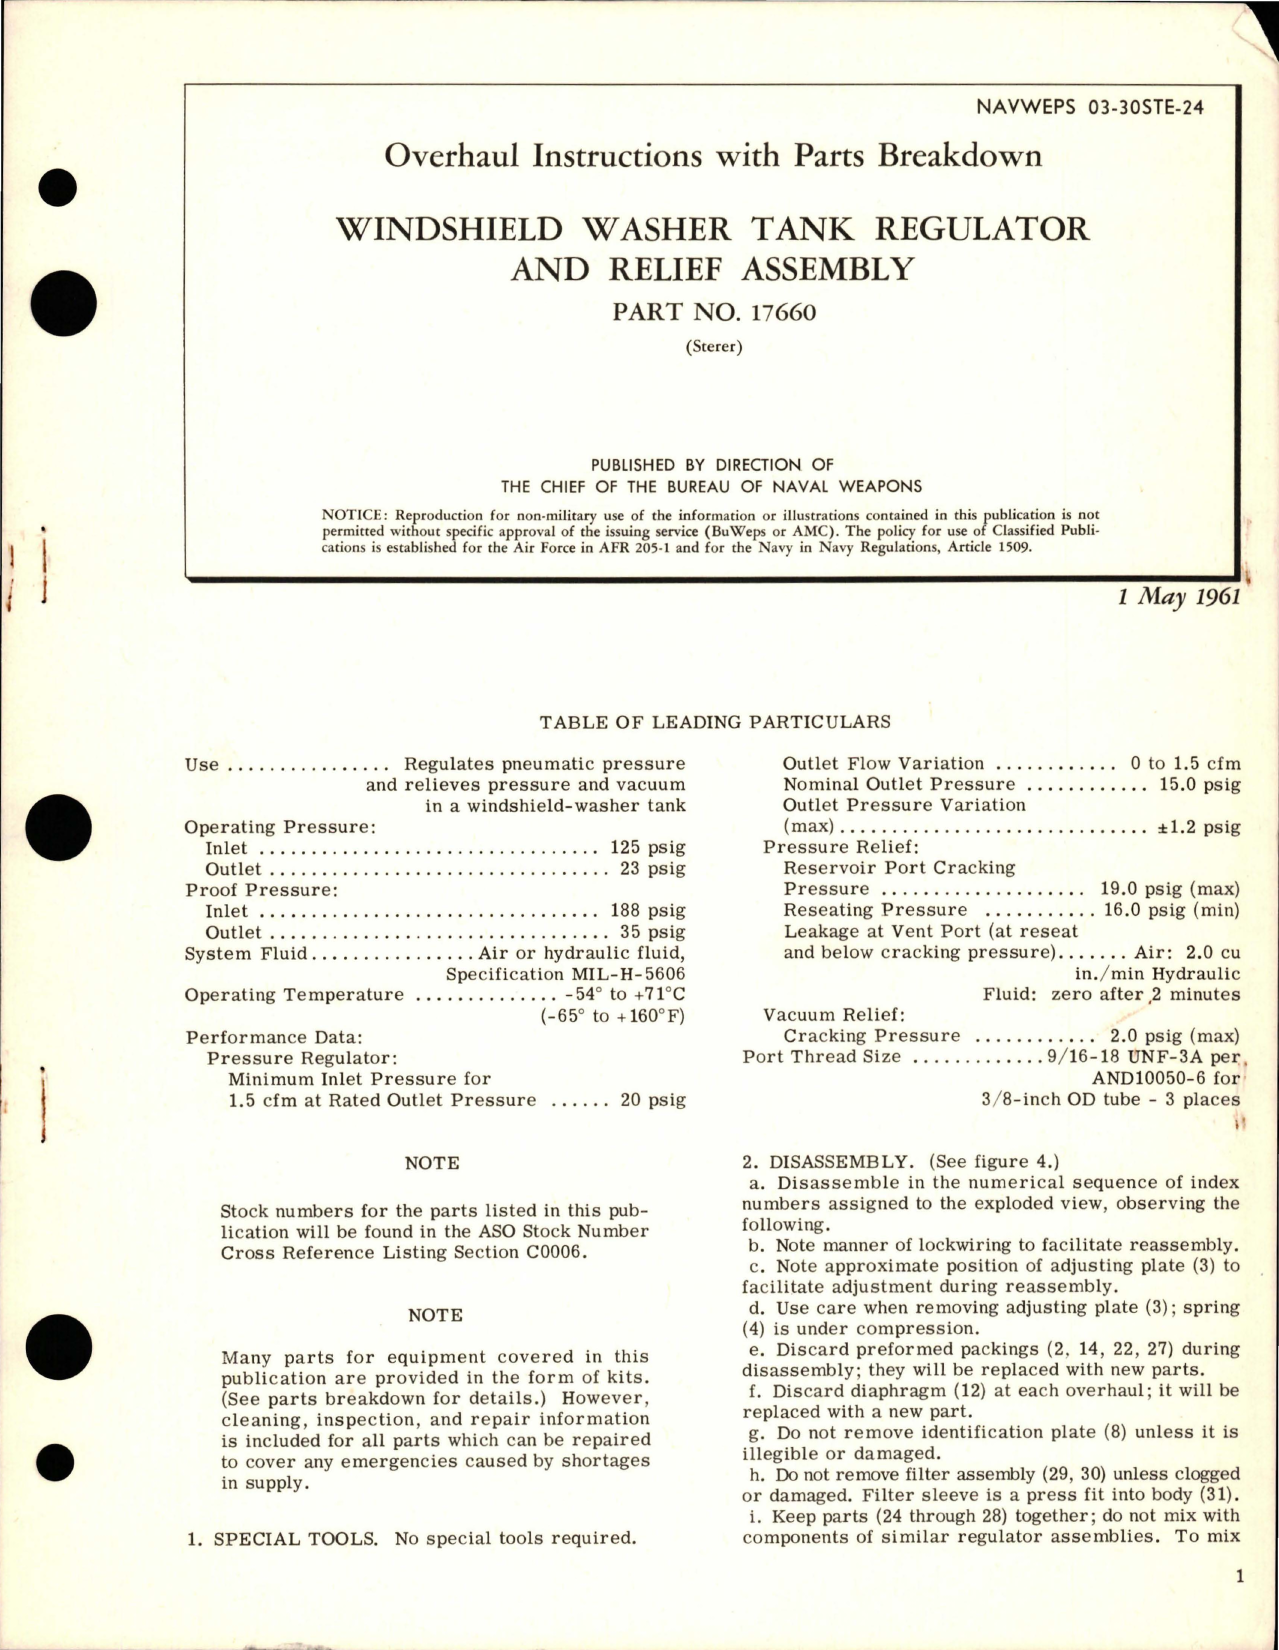 Sample page 1 from AirCorps Library document: Overhaul Instructions with Parts Breakdown for Windshield Washer Tank Regulator and Relief Assembly - Part 17660